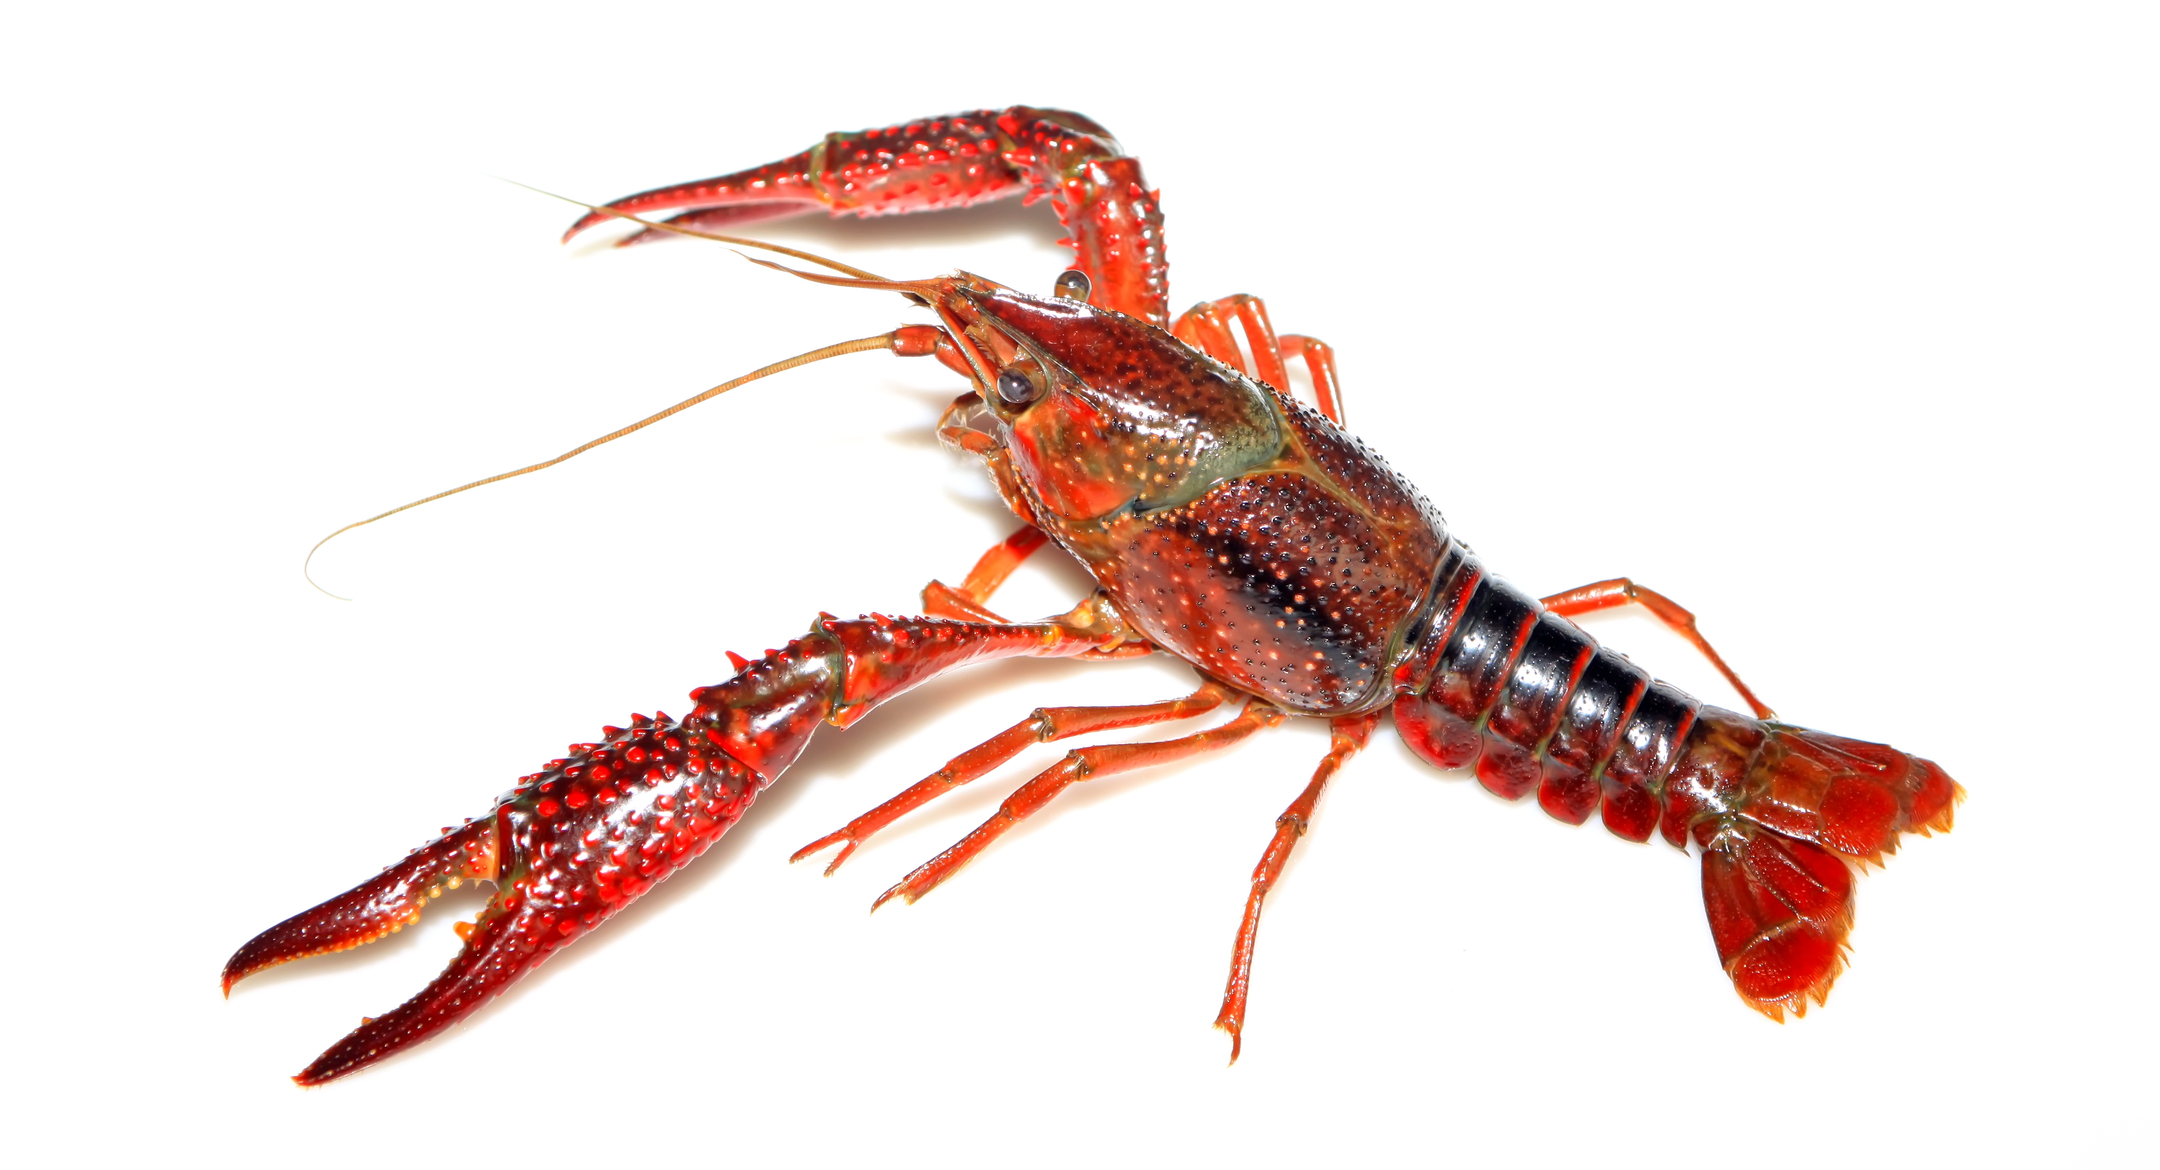 Crawfish, also commonly referred to as crayfish. Credit: chinahbzyg/Shutterstock.com